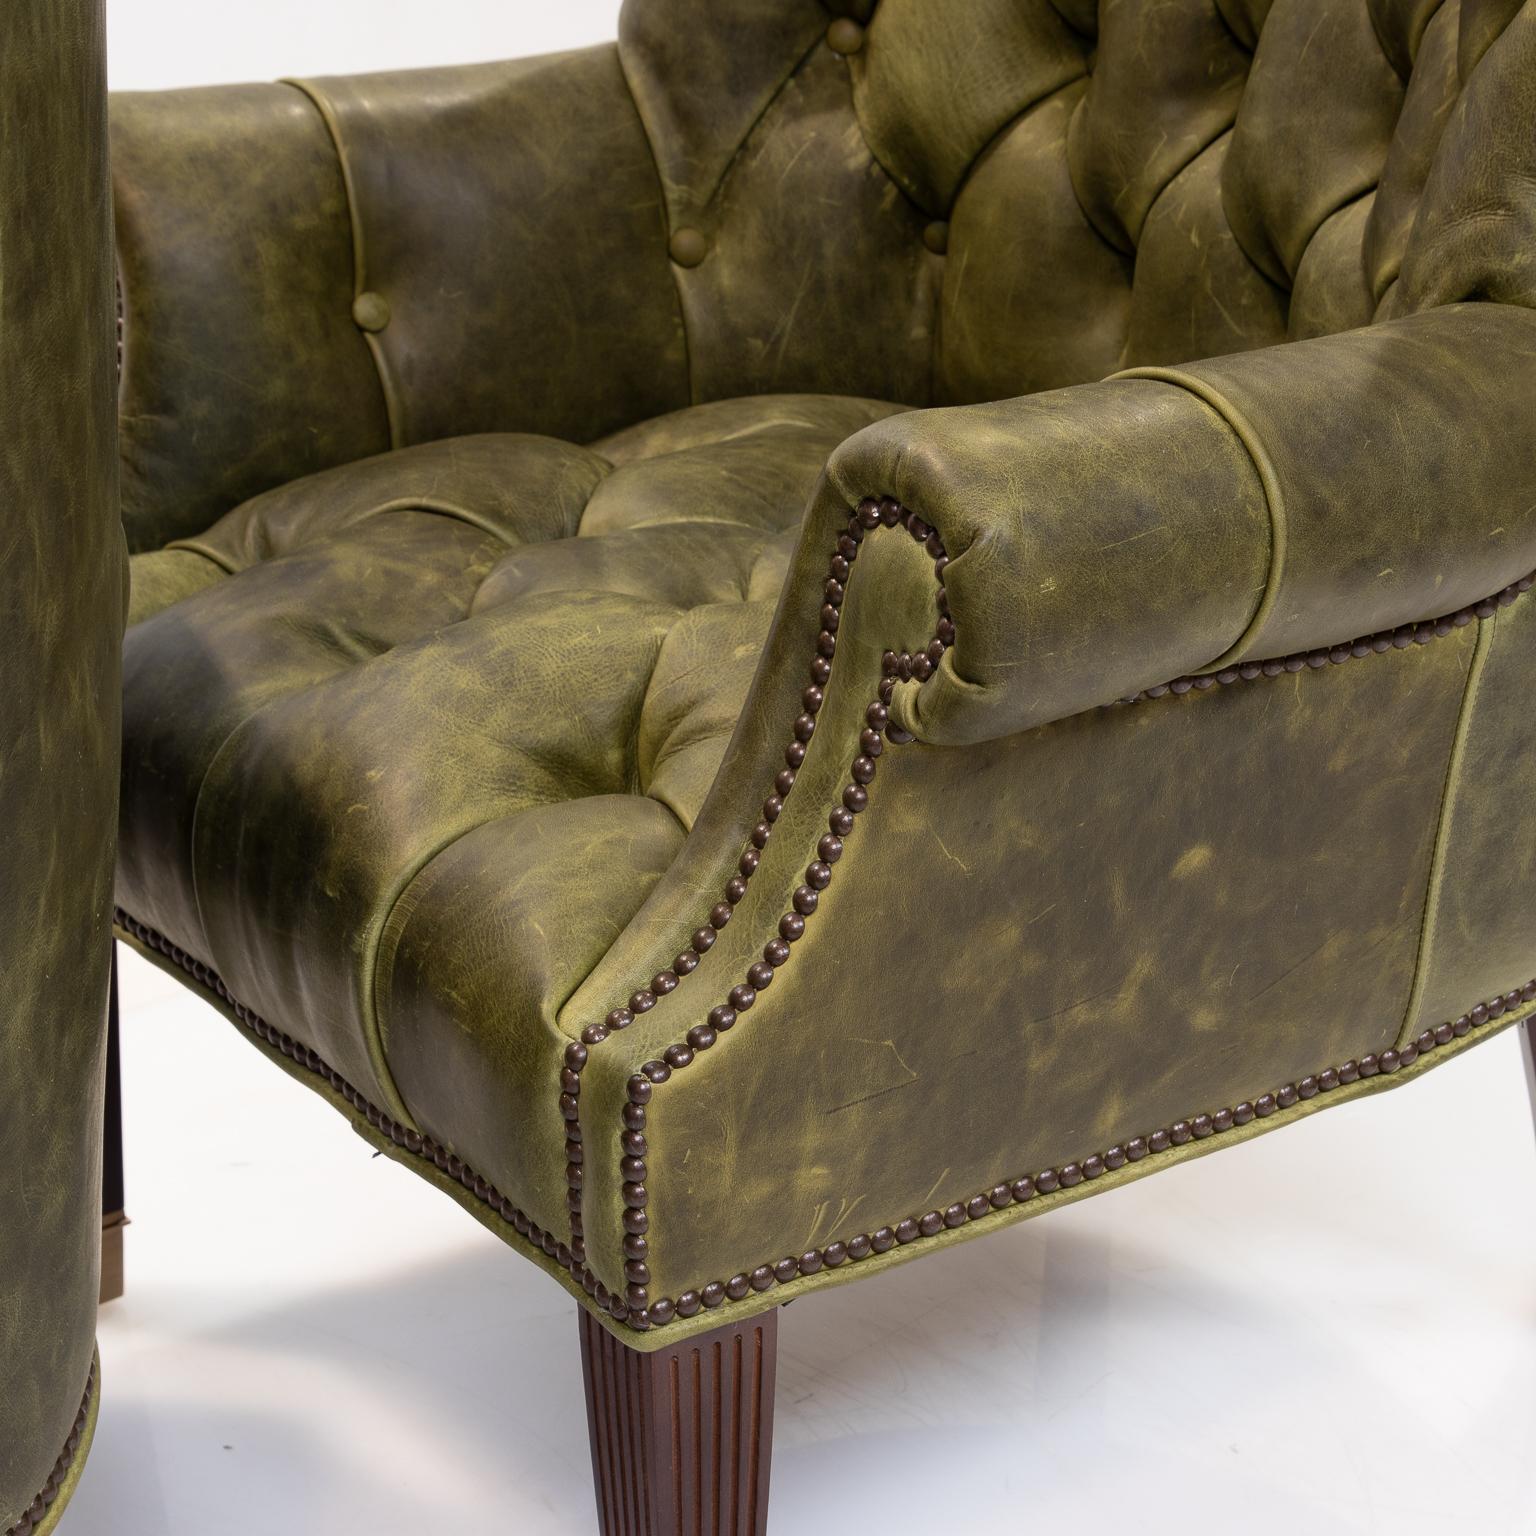 Dyed Pair of Tufted Green Leather Wing Chairs